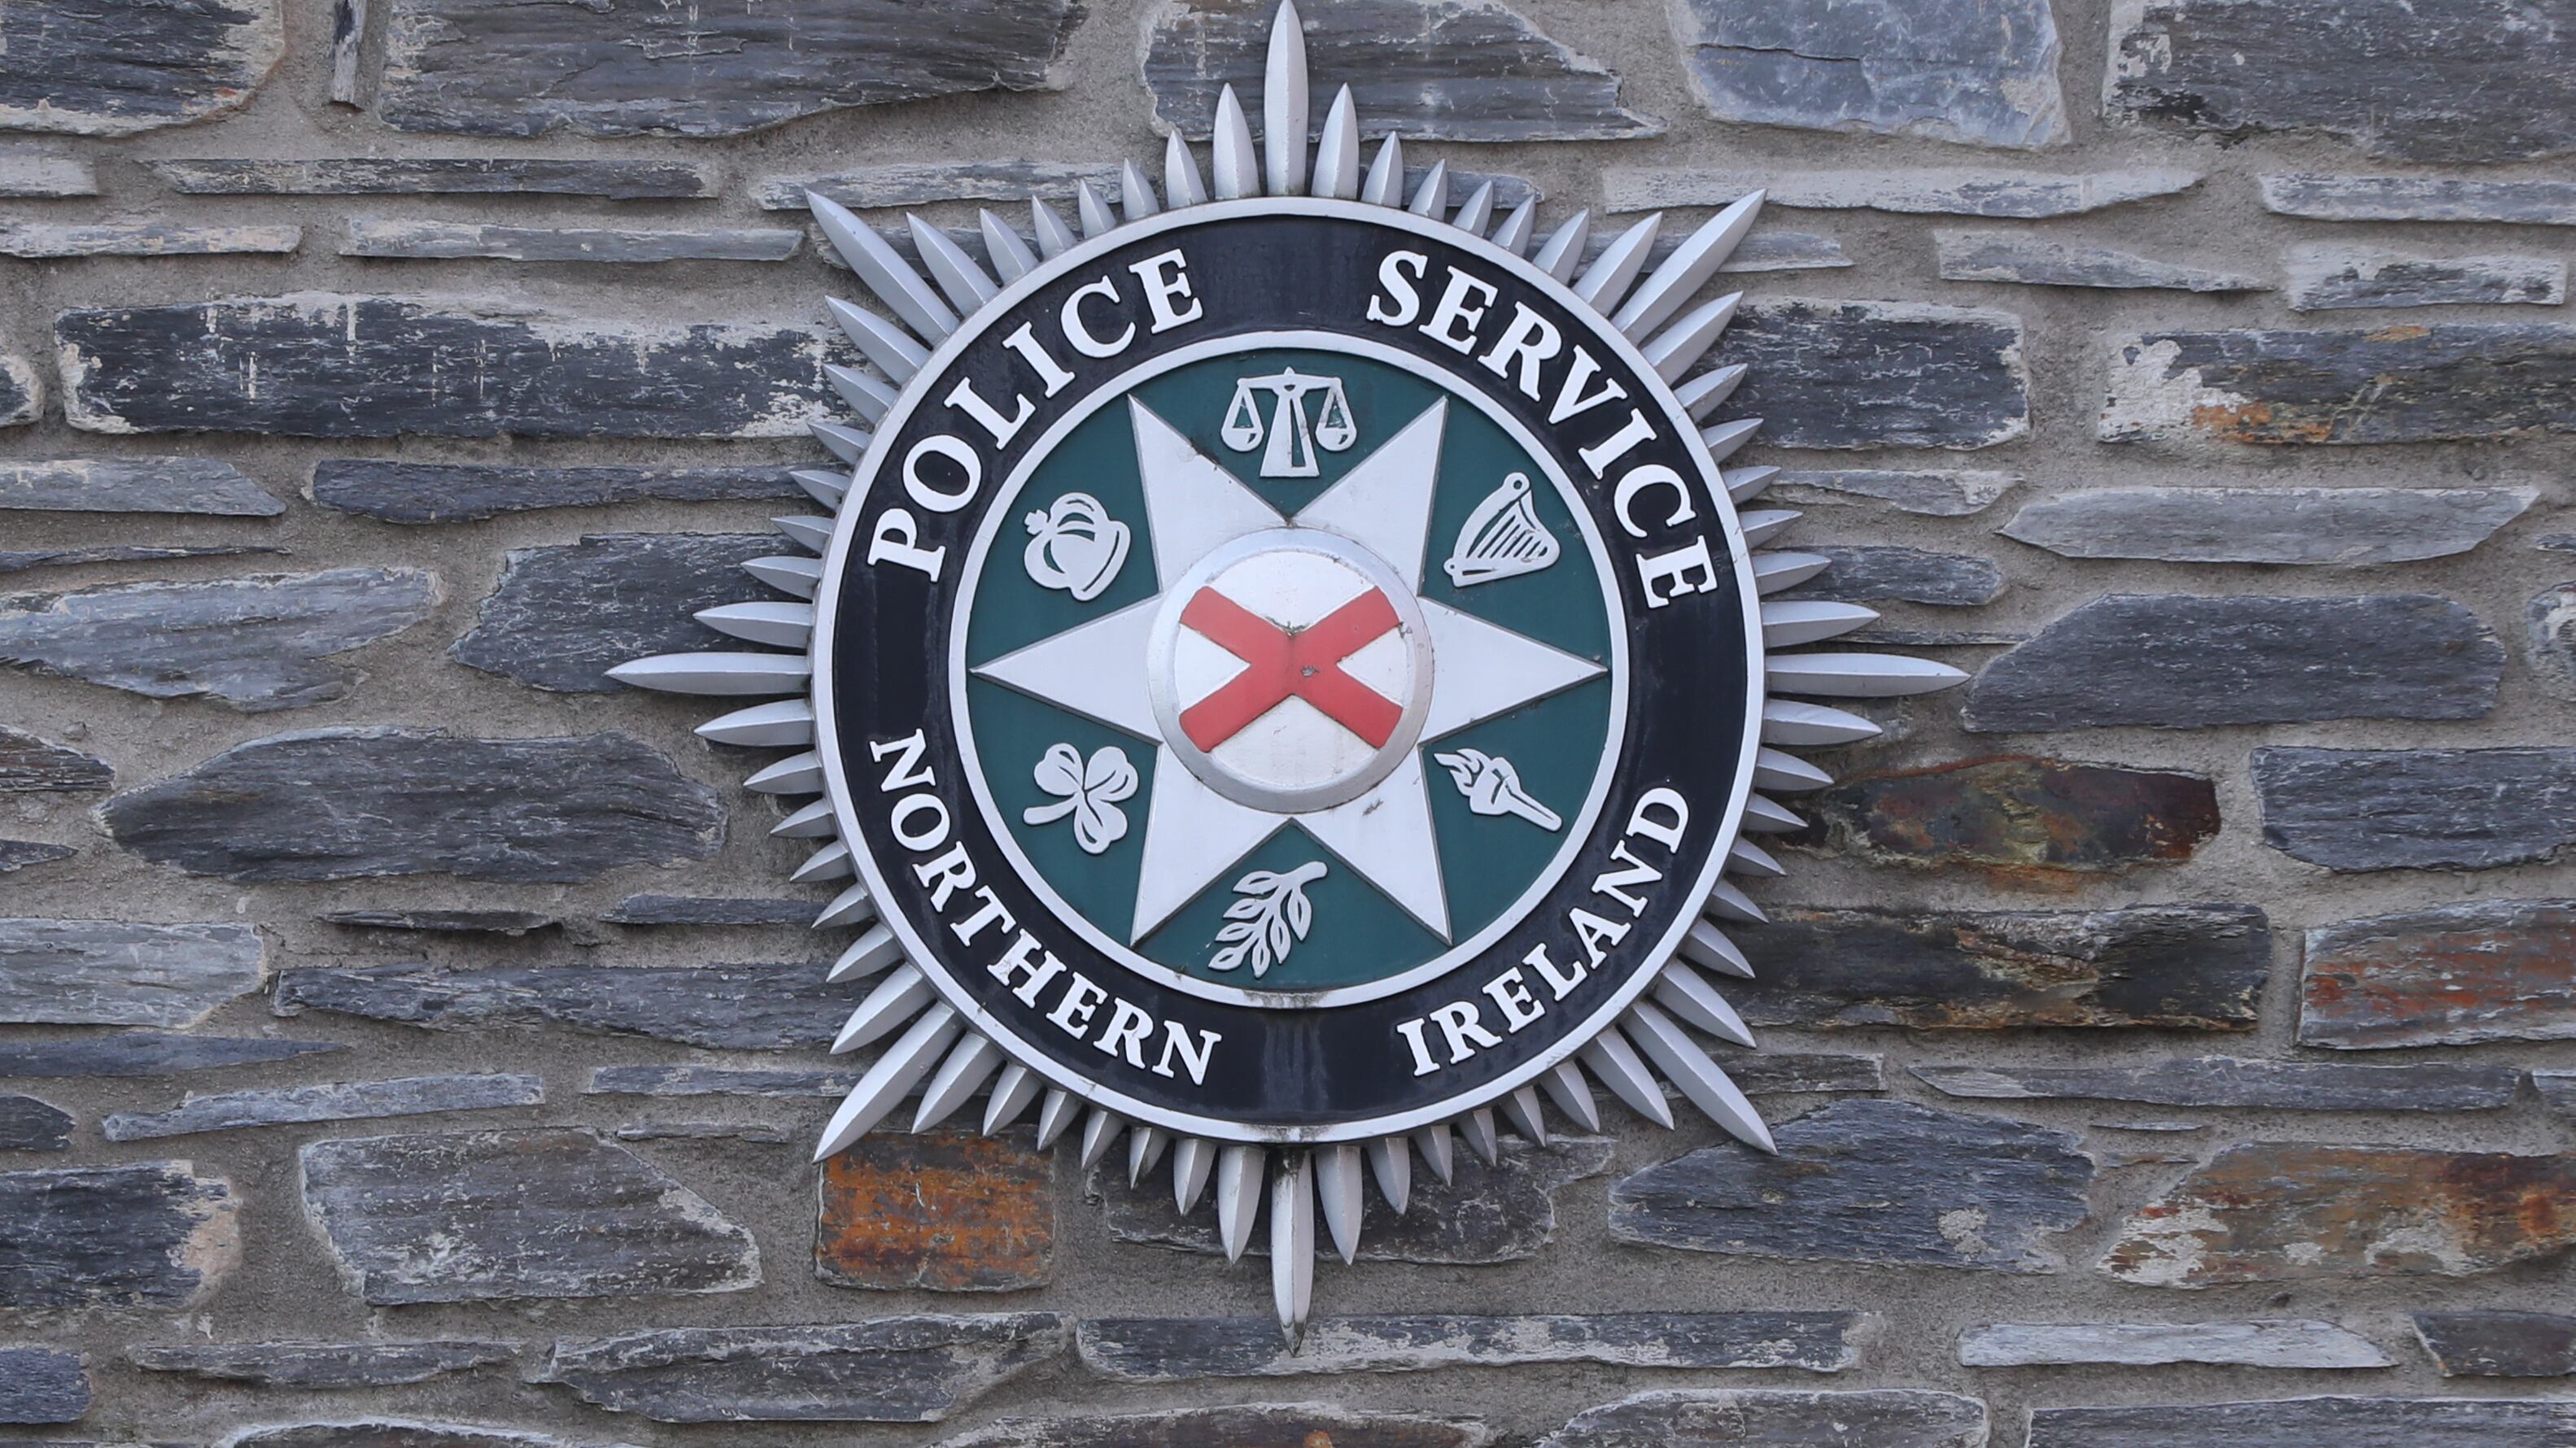 The PSNI confirmed a man has died in a road collision in Co Antrim